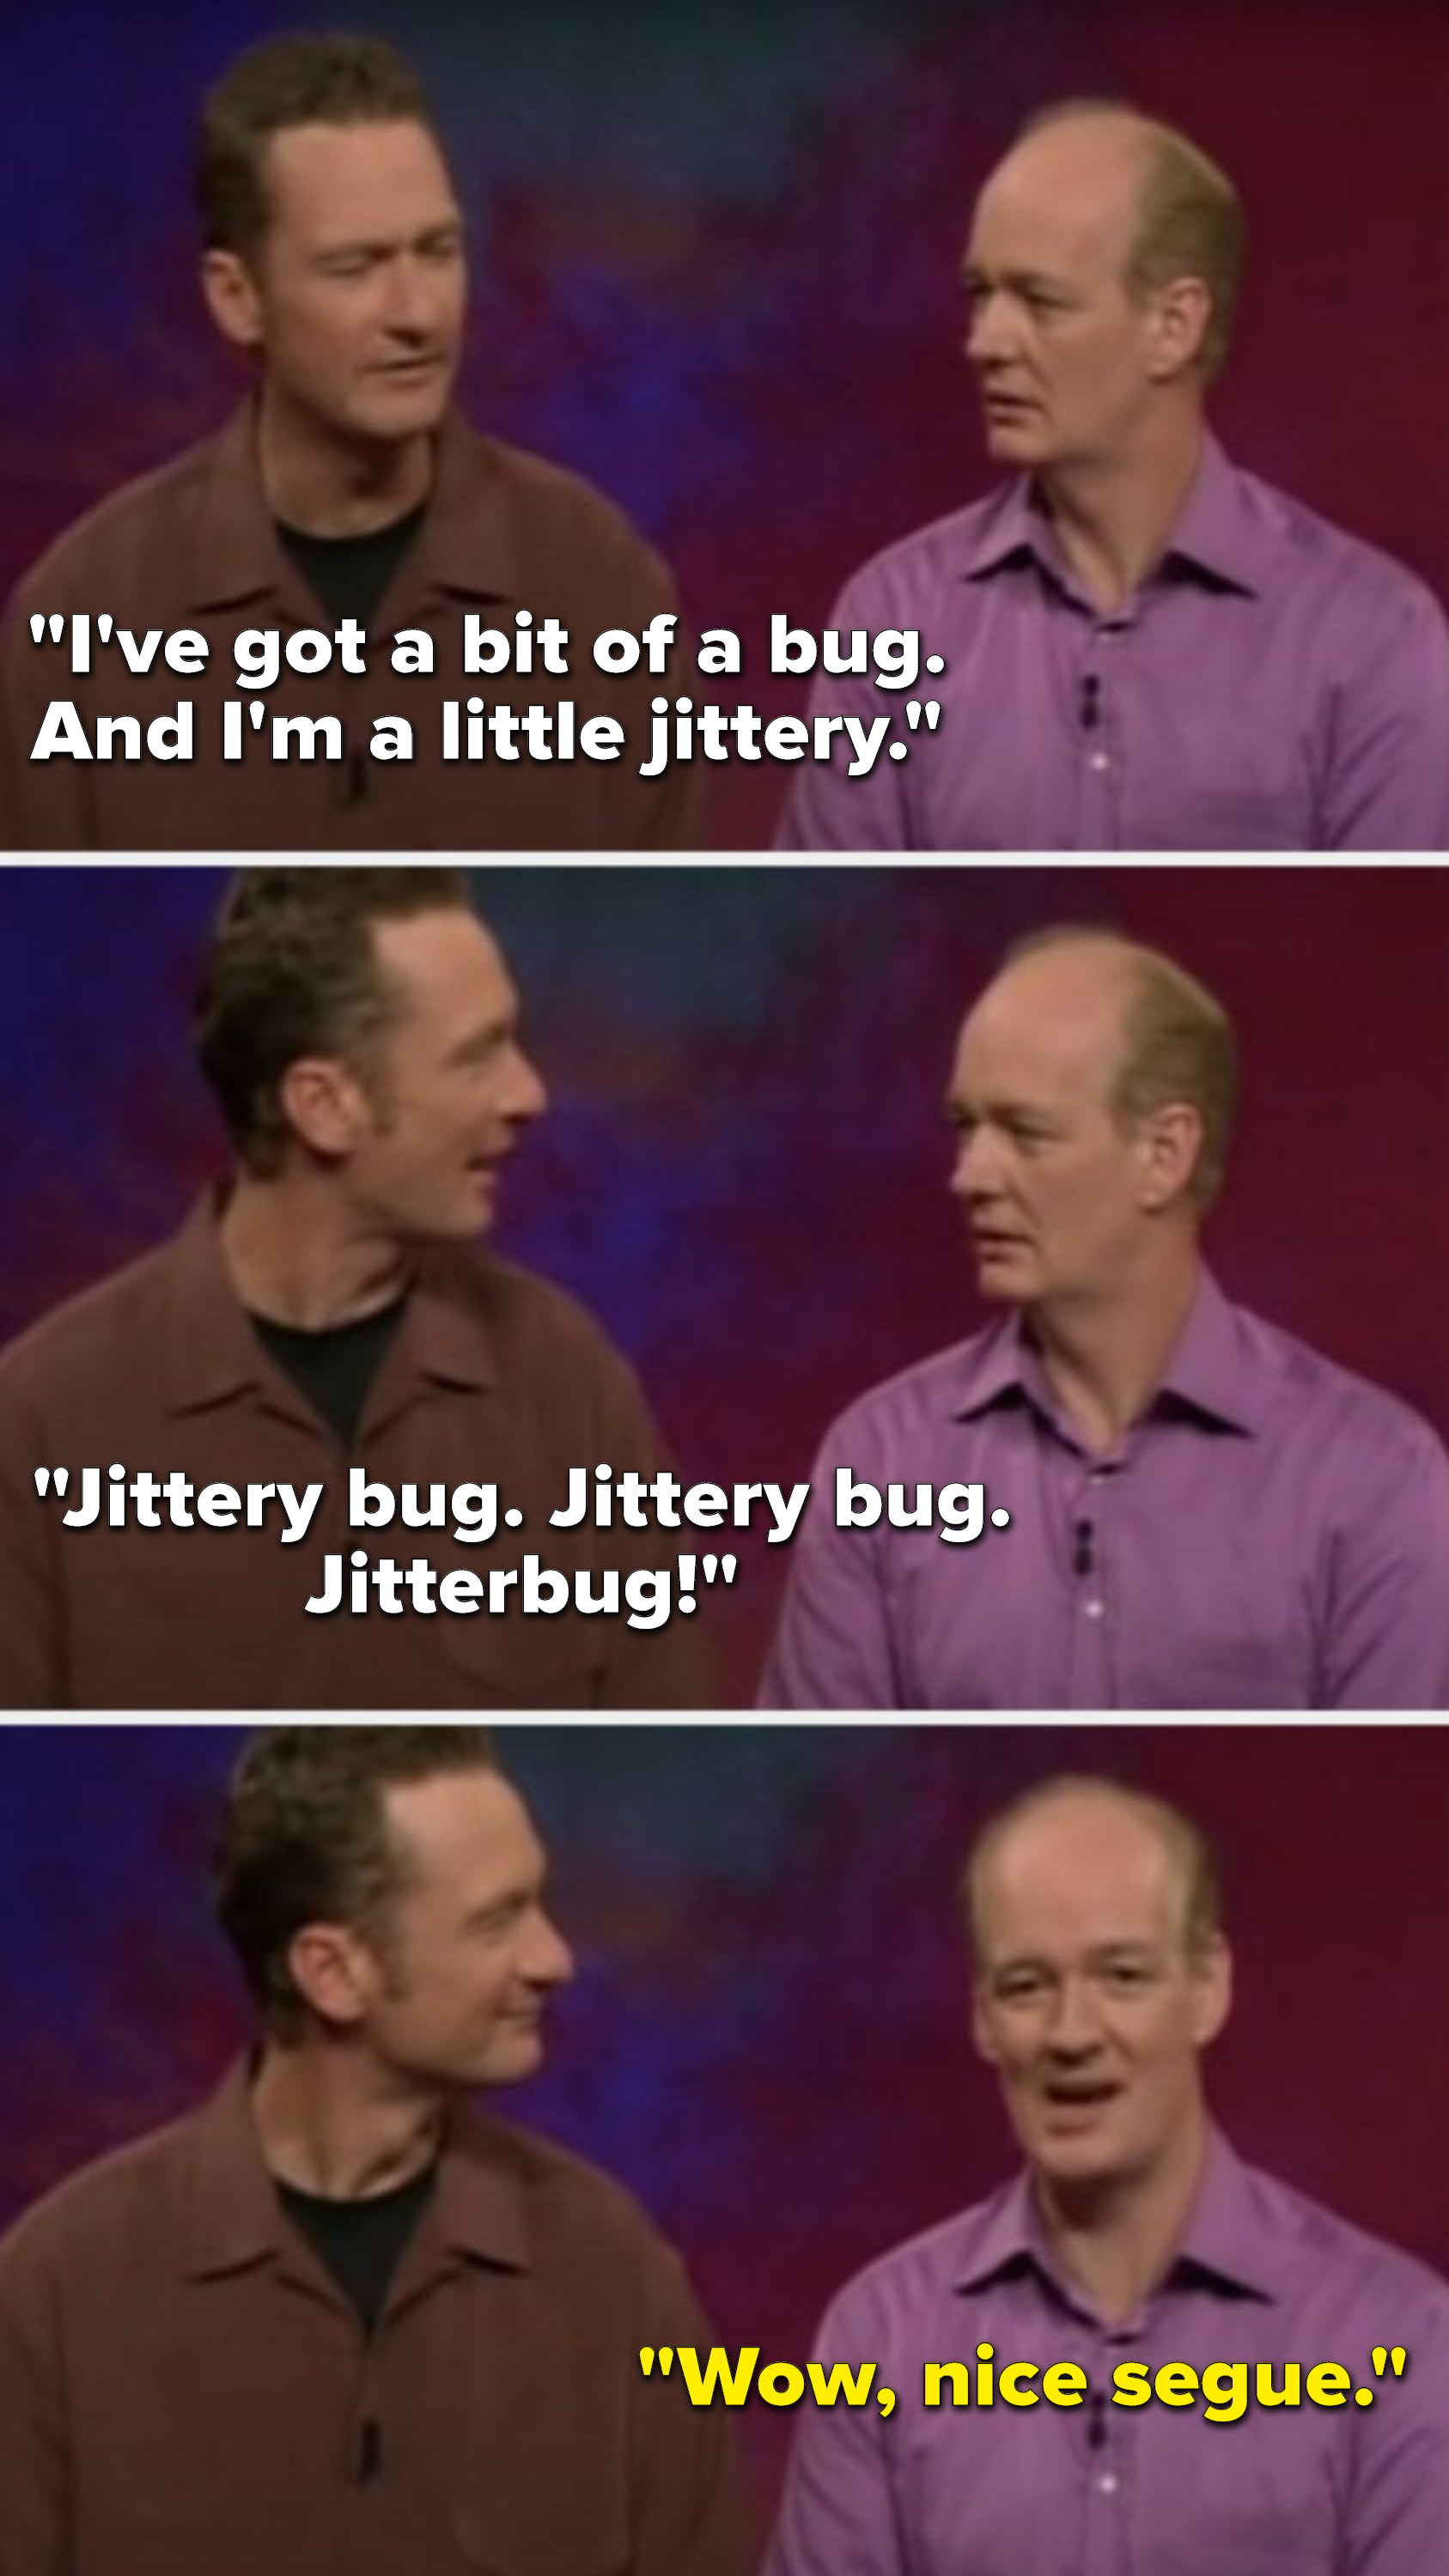 On Whose Line Is It Anyway, Ryan Stiles says, I have a bit of a bug, and I am a little jittery, jittery bug, jittery bug, jitterbug, and Colin Mochrie says, Wow, nice segue